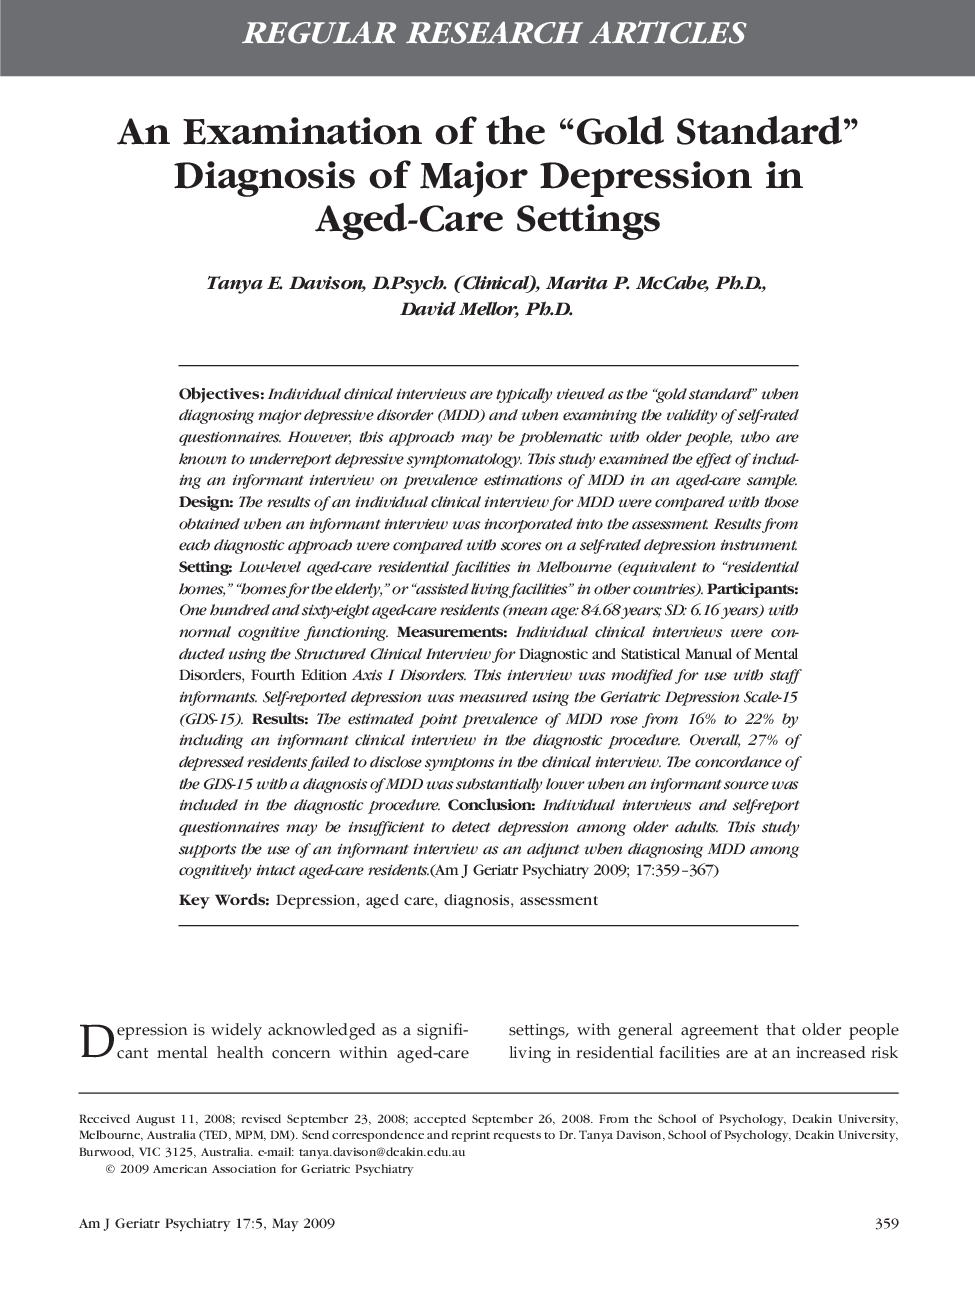 An Examination of the “Gold Standard” Diagnosis of Major Depression in Aged-Care Settings